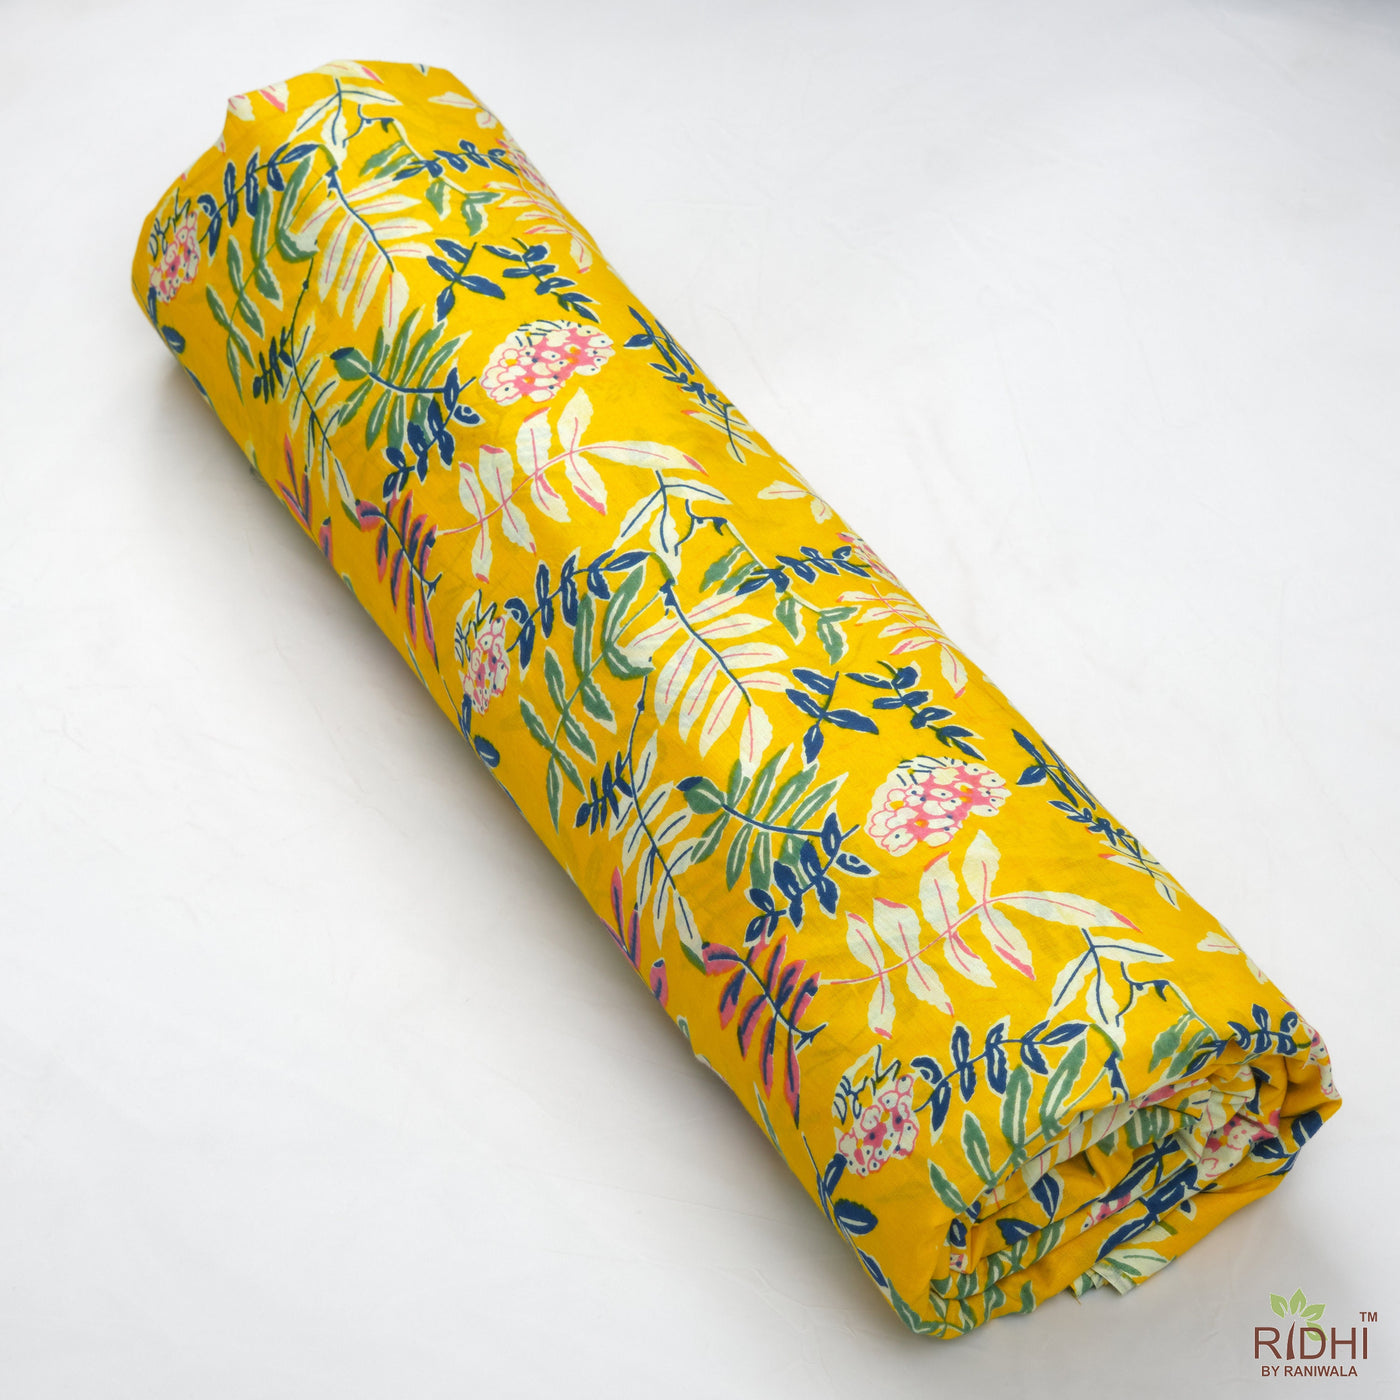 Amber Yellow, Prussian Blue, Green Indian Floral Printed 100% Pure Lightweight Cotton Cloth, Fabric by the yard, Curtains Pillow Covers Bags